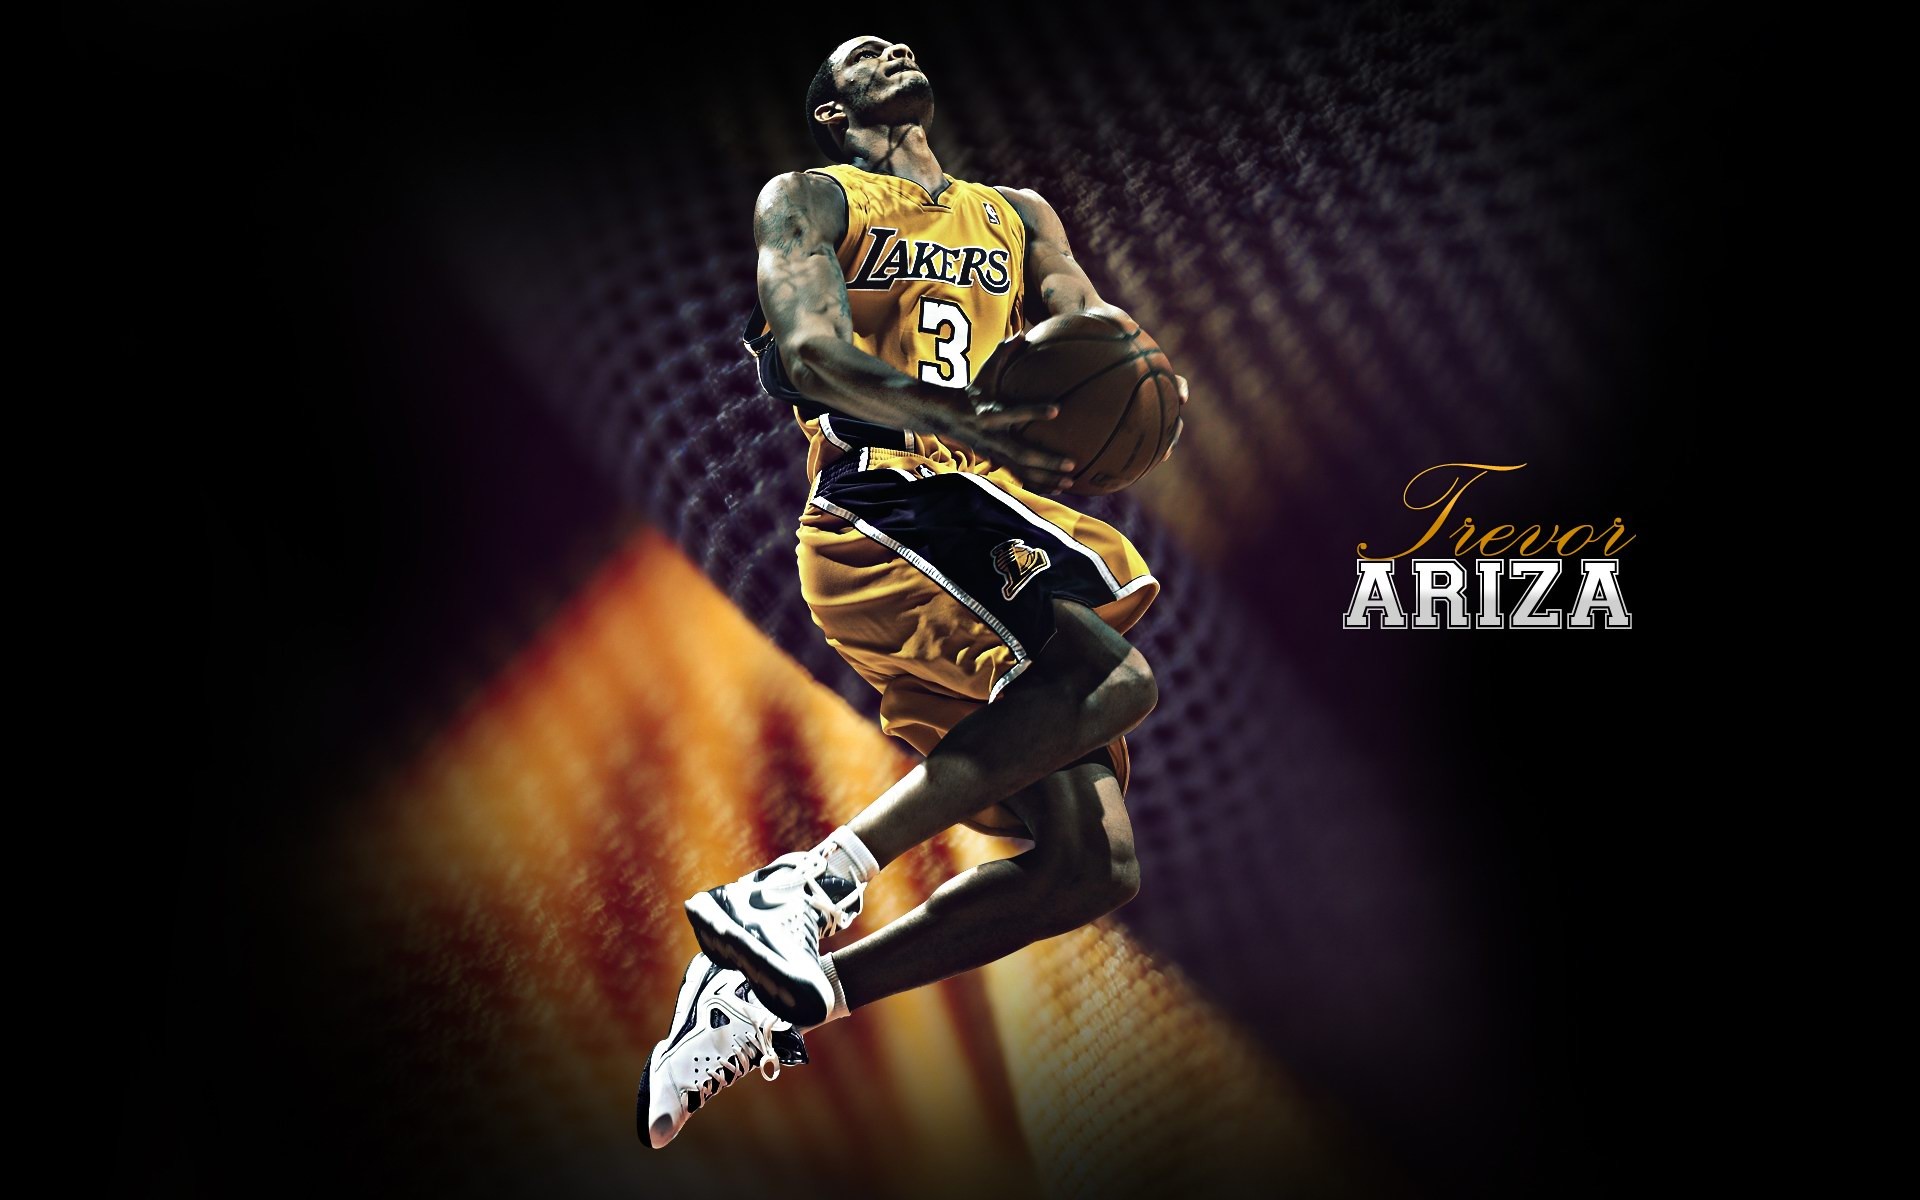 Los Angeles Lakers Official Wallpaper #26 - 1920x1200